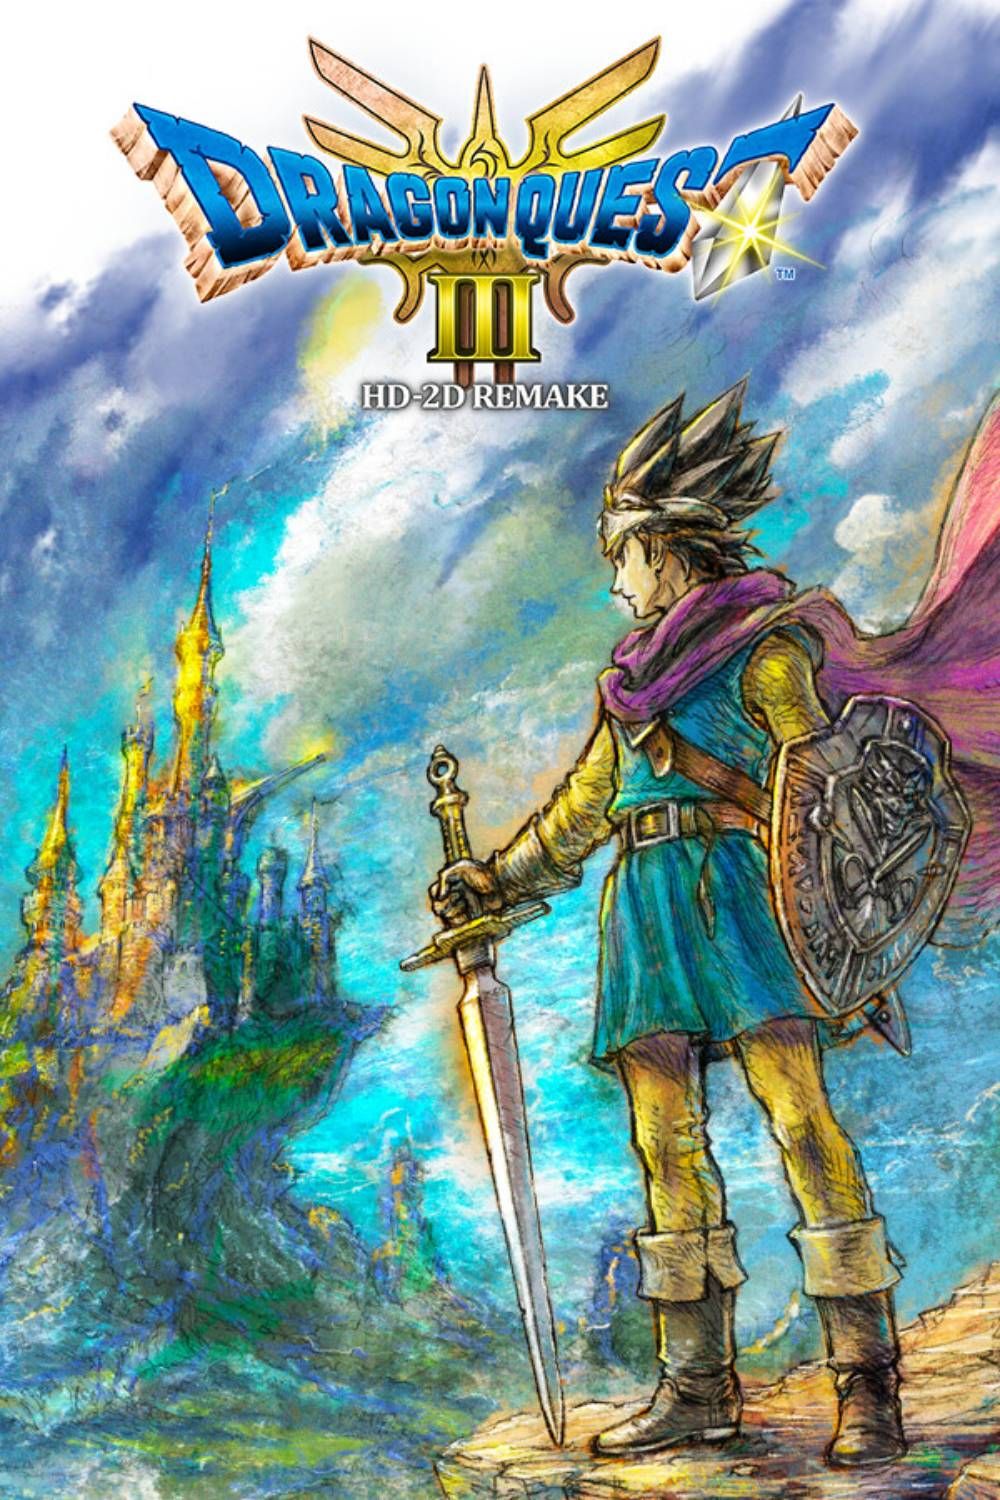 Dragon Quest III HD-2D Remake Tag Page Cover Art